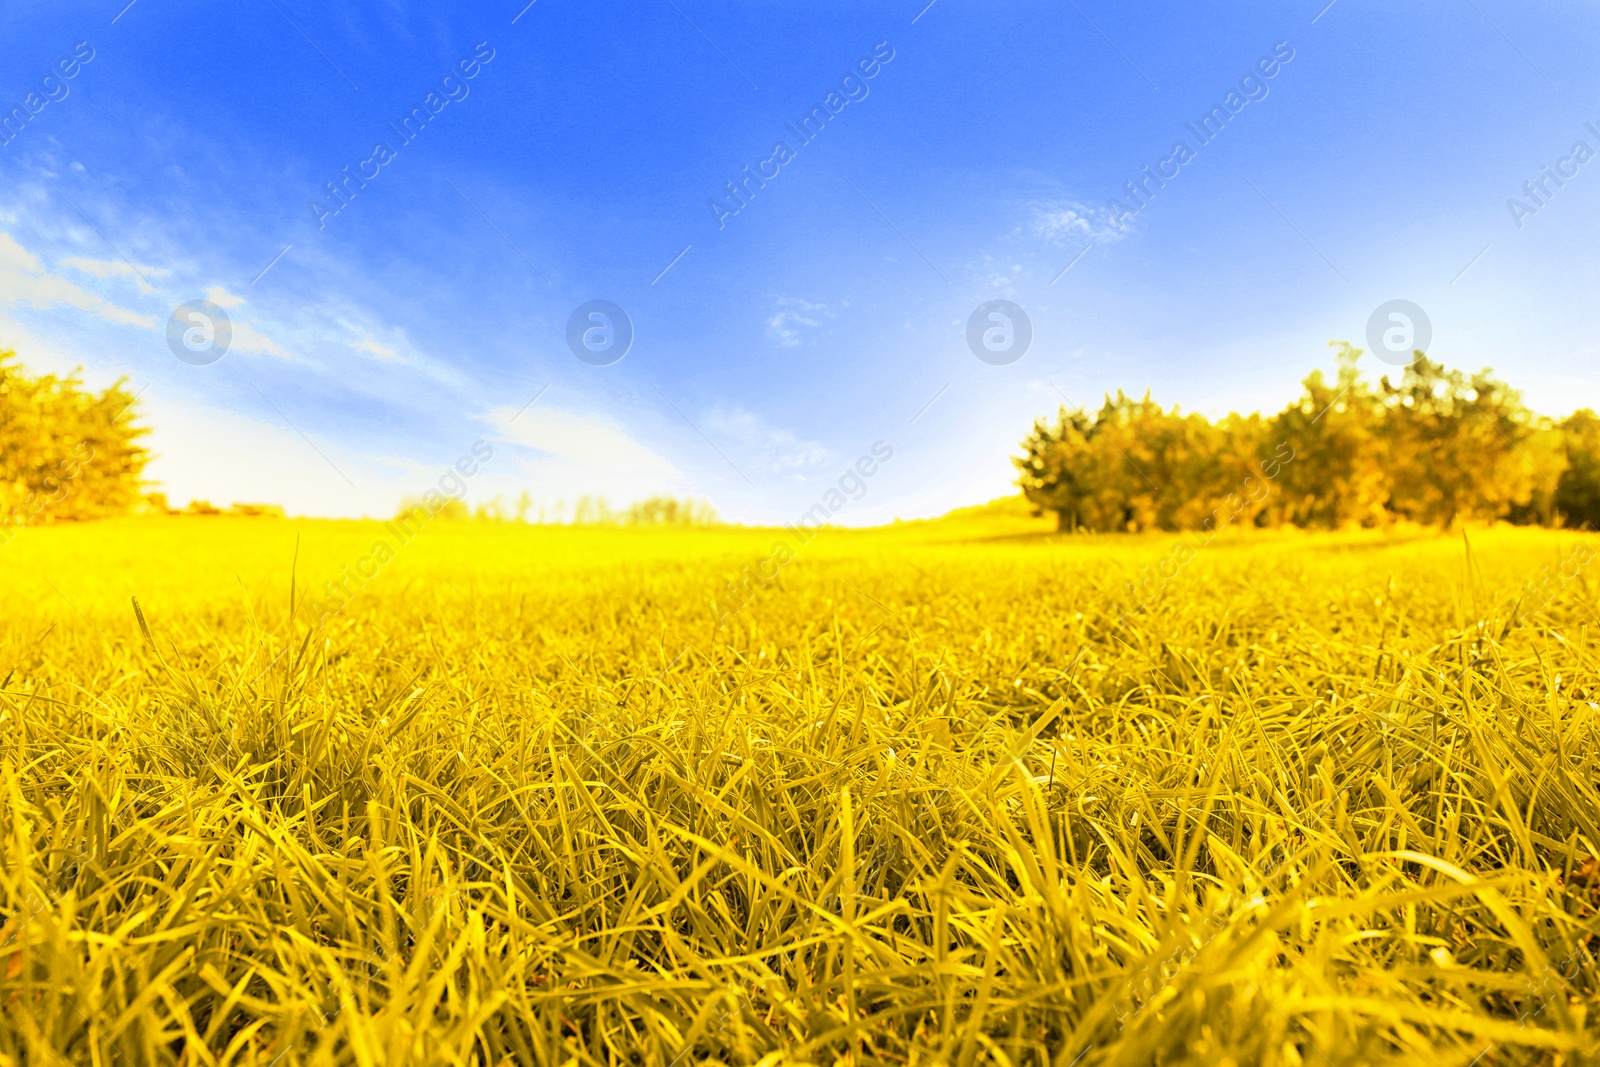 Image of Ukrainian flag. Picturesque view of yellow grassland under blue sky